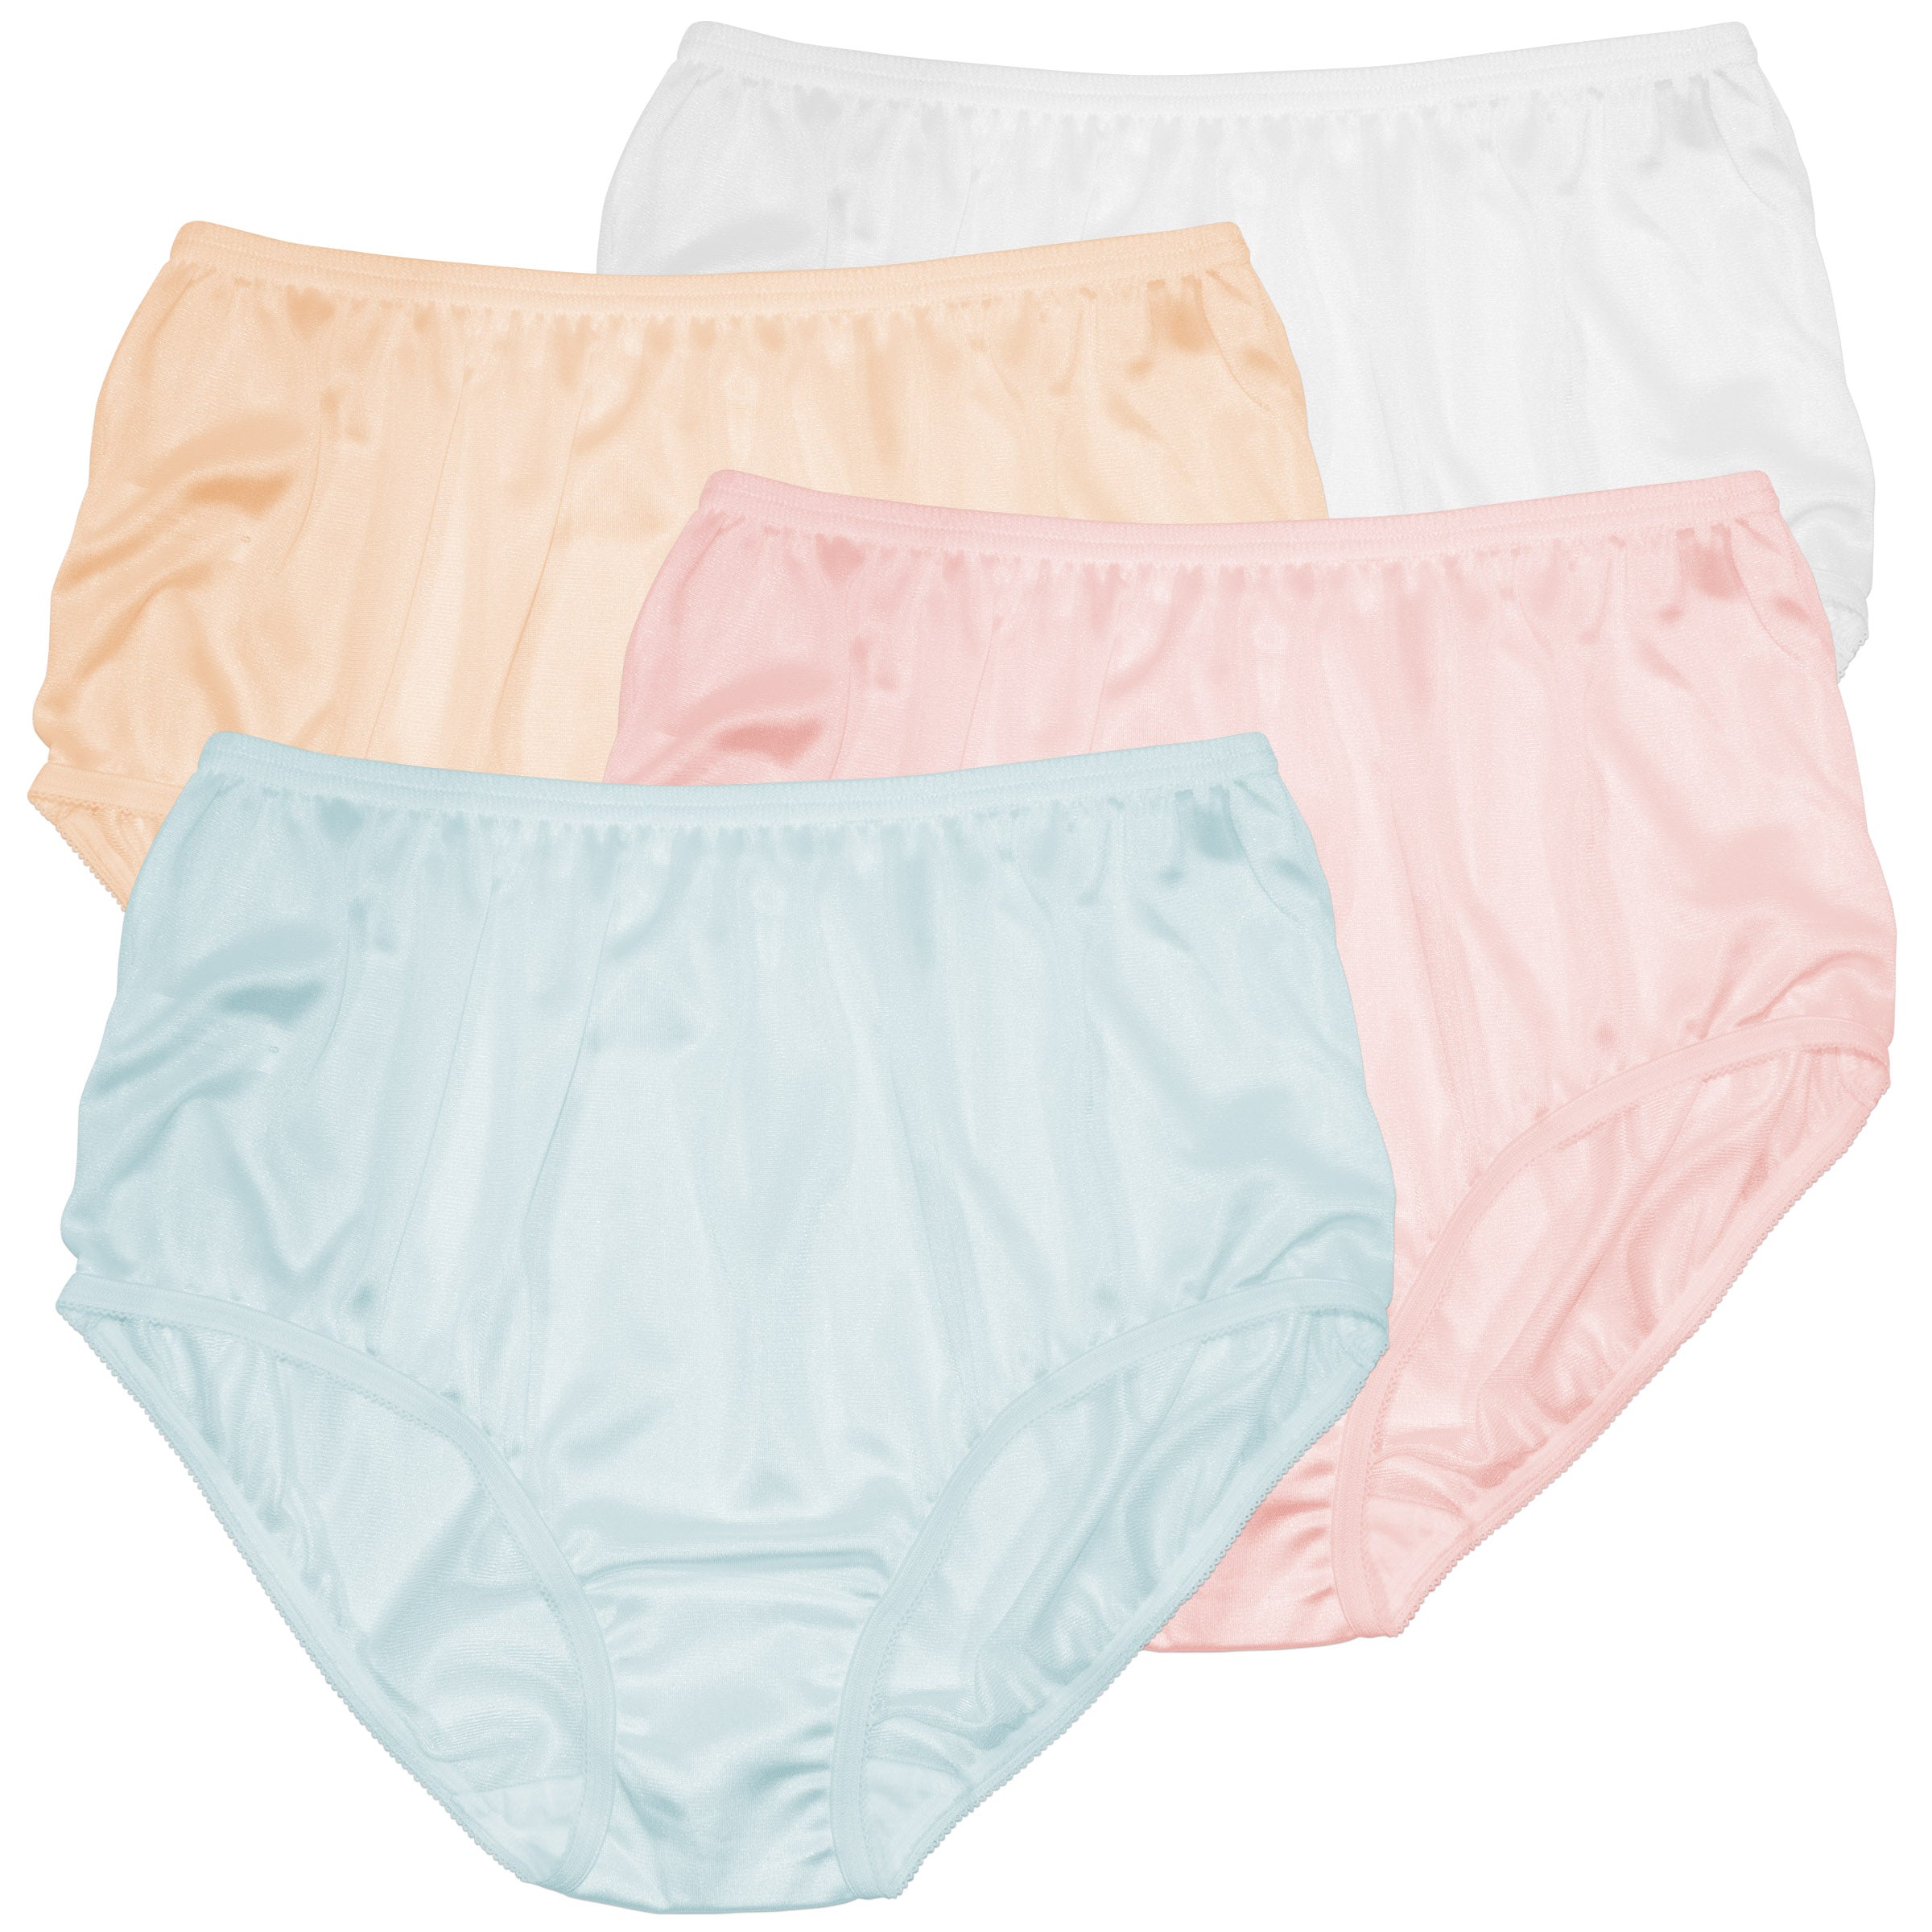 Classic Nylon, Full Coverage Brief Panty Assorted Color 4 Pack or 12 Pack (Plain Jane)